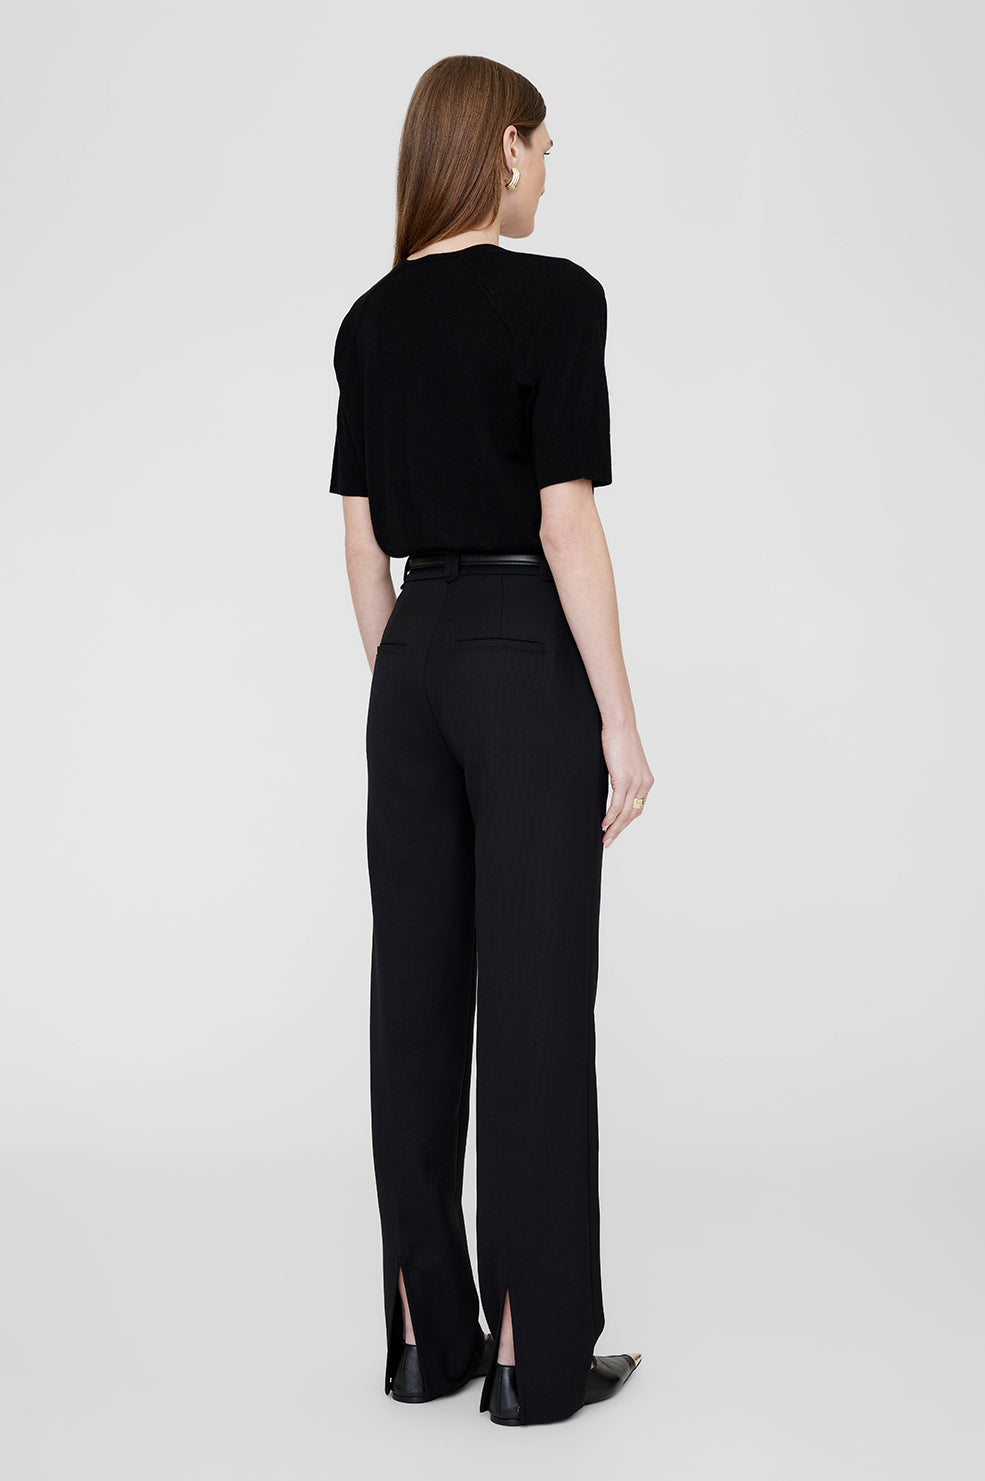 ZARA Authentic Highwaist Trousers (PREORDER), Women's Fashion, Bottoms,  Other Bottoms on Carousell